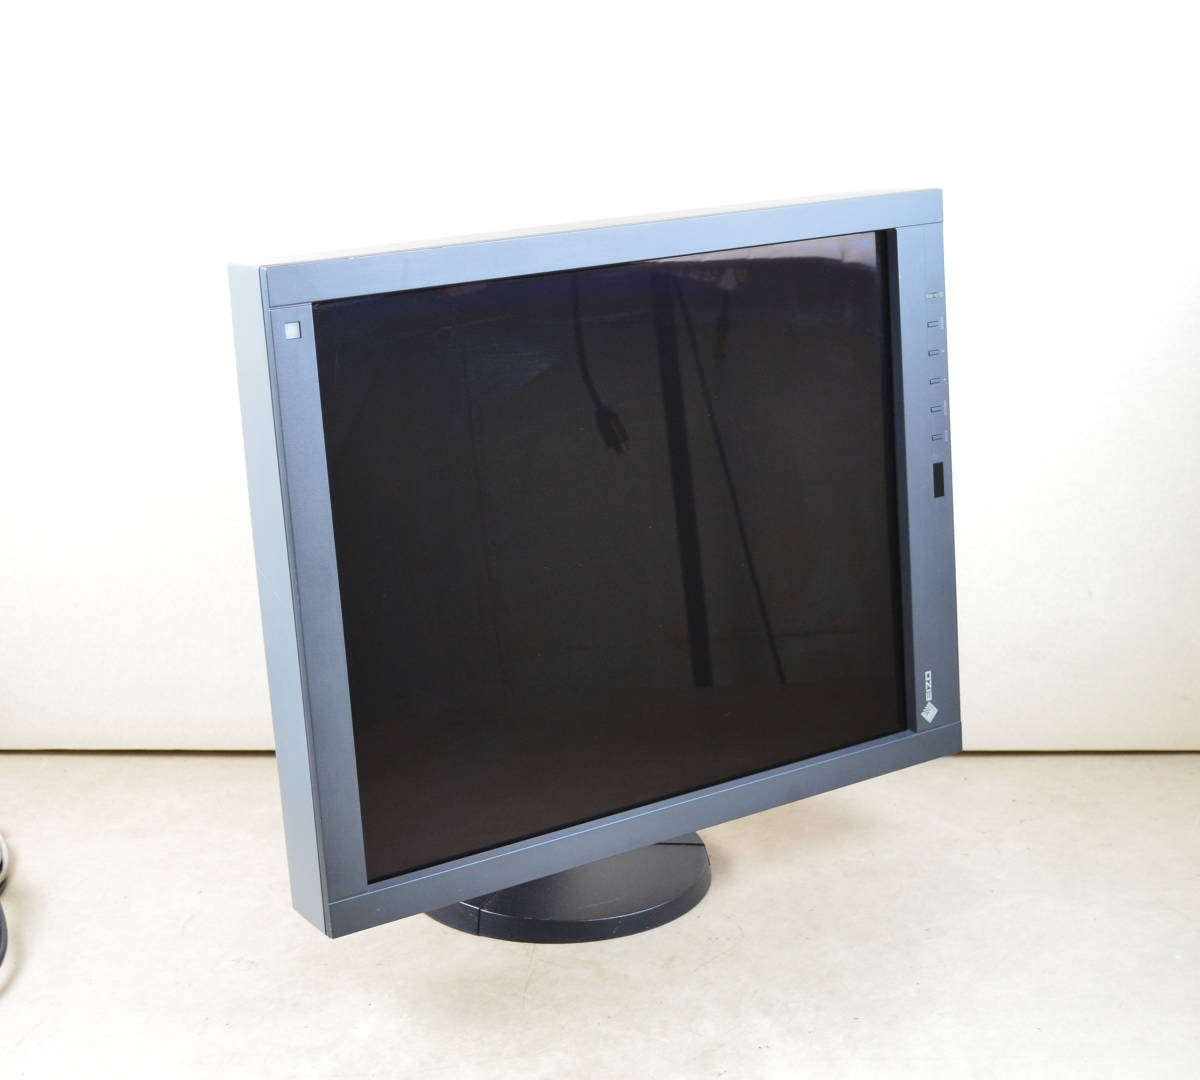 3926 medical care for High-definition monitor EIZO RadiForce GX240 21.3 wide monochrome IPS panel going up and down * rotation * vertical display 